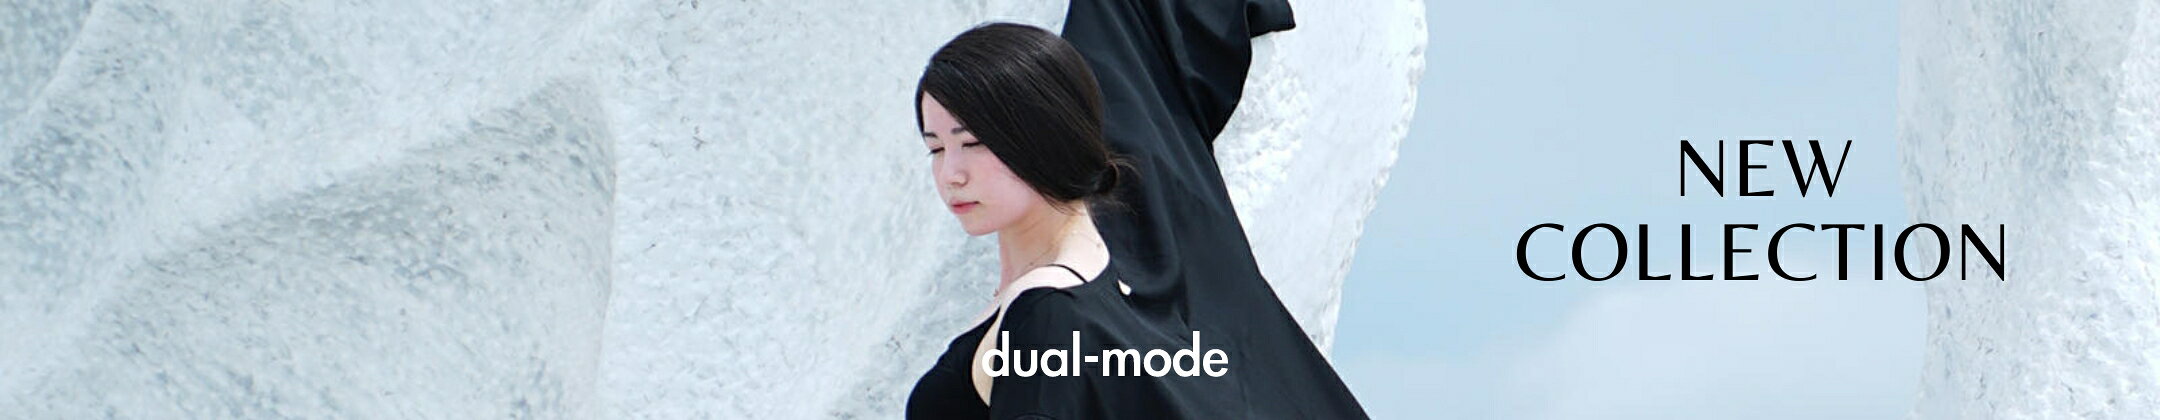 dual-mode Collection